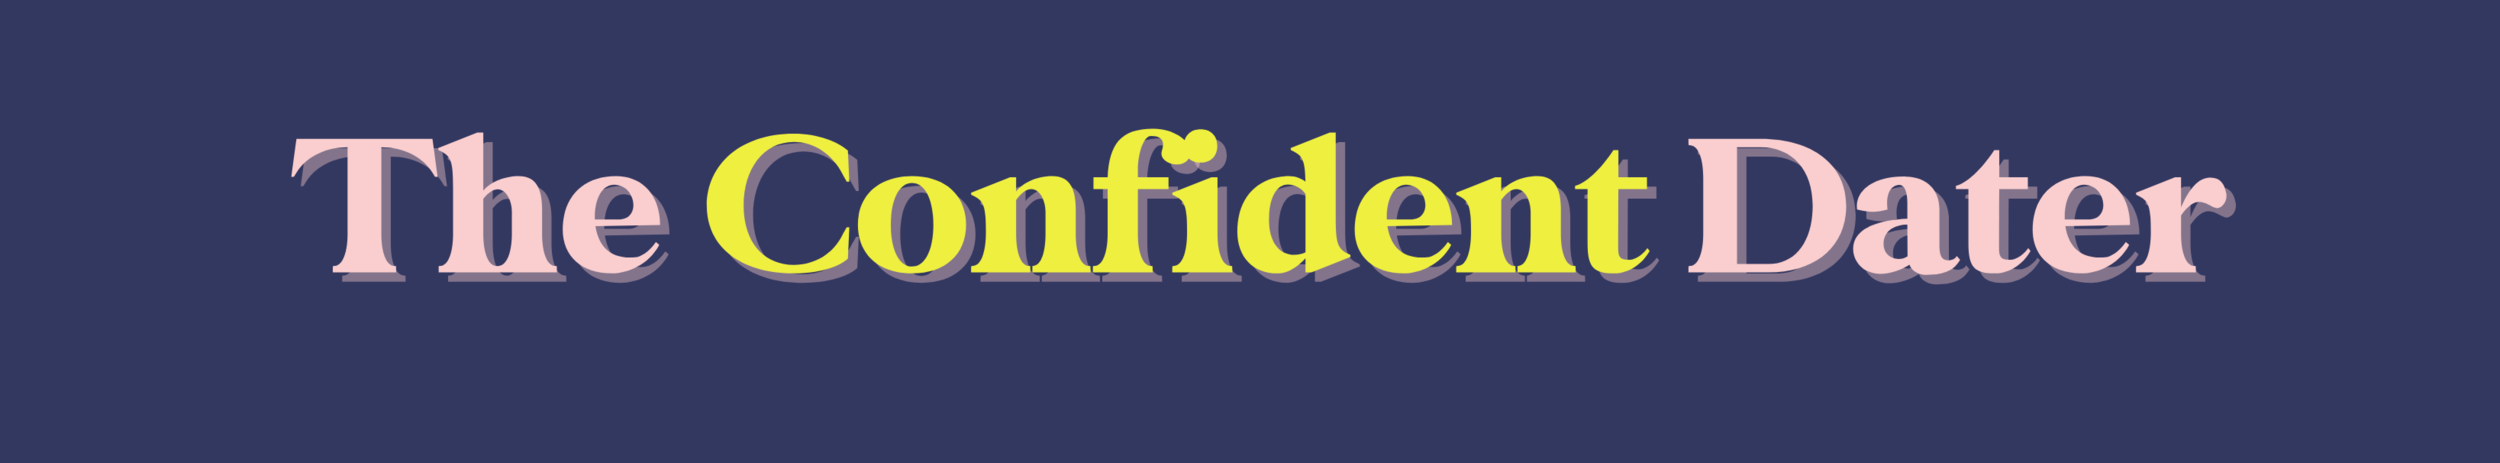 confident dater banner.png